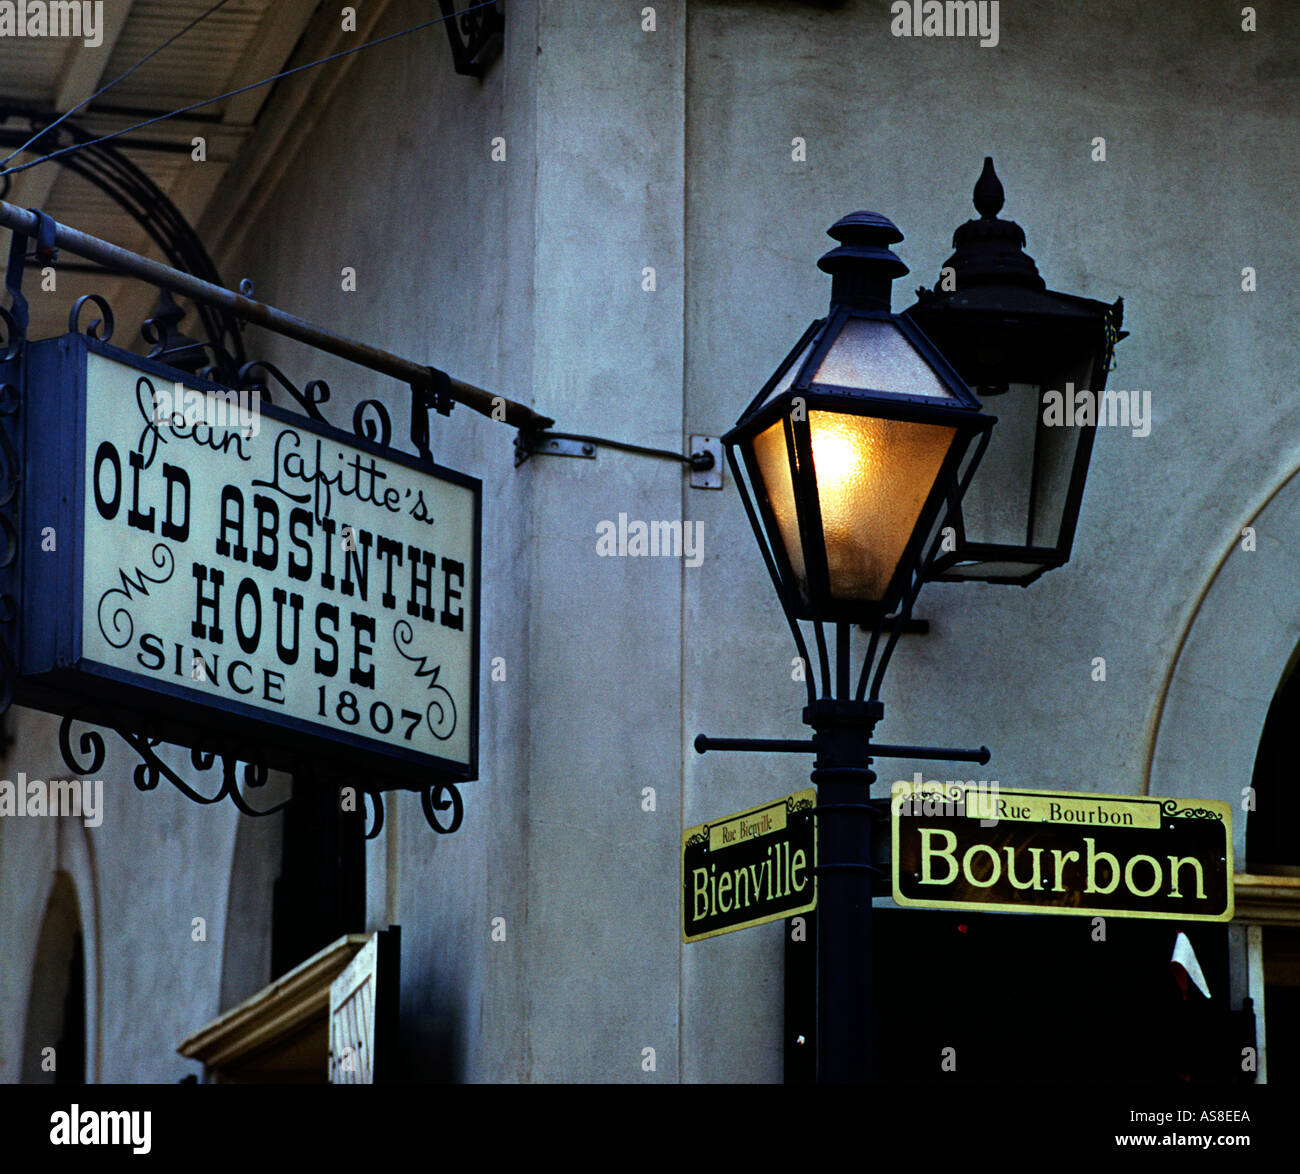 Old Absinthe House on Bourbon Street New Orleans USA Stock Photo